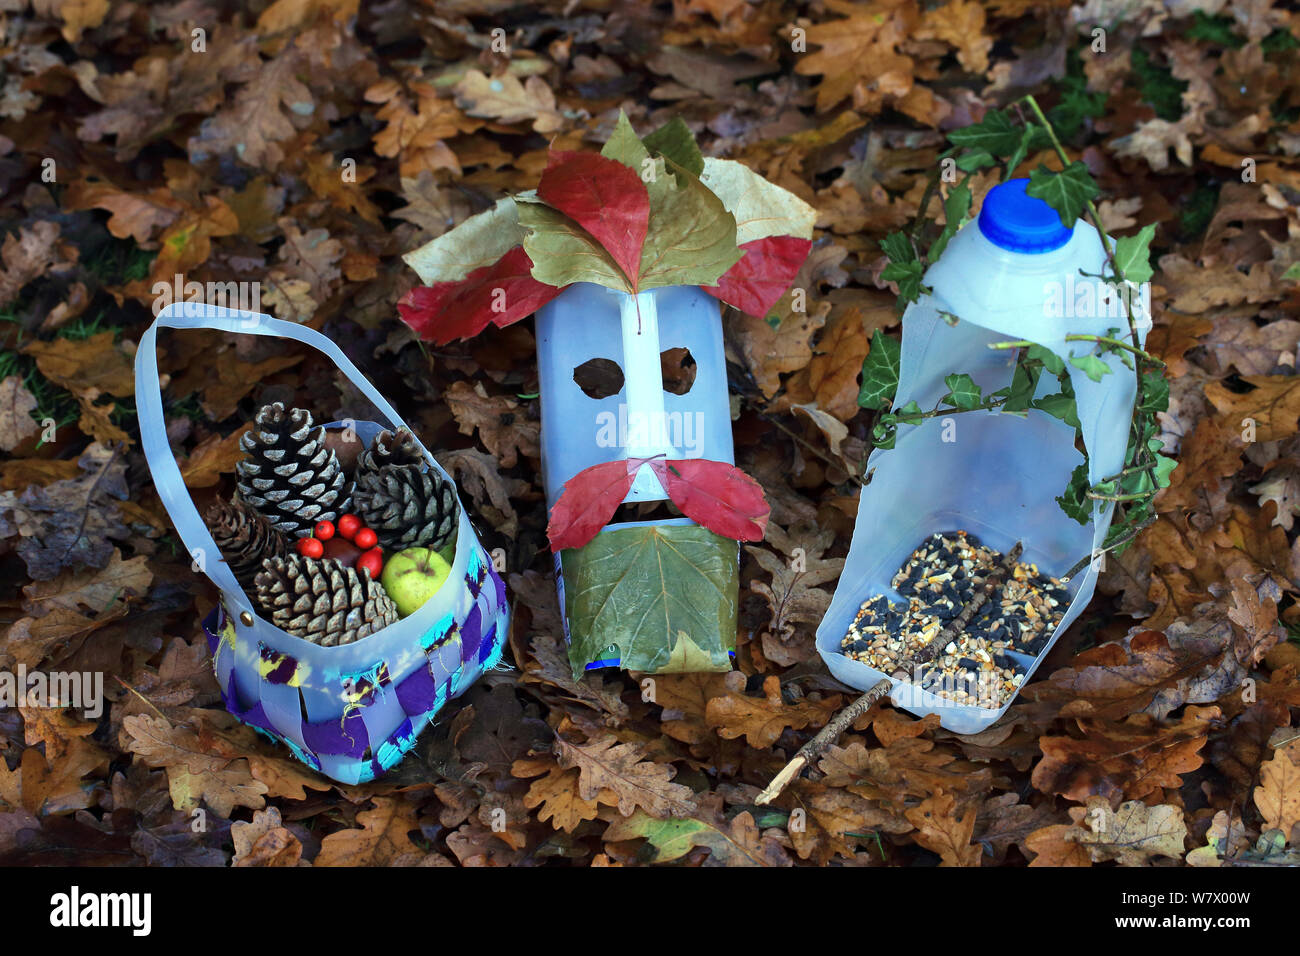 Masks made from recycled bottles, England, UK, December Stock Photo